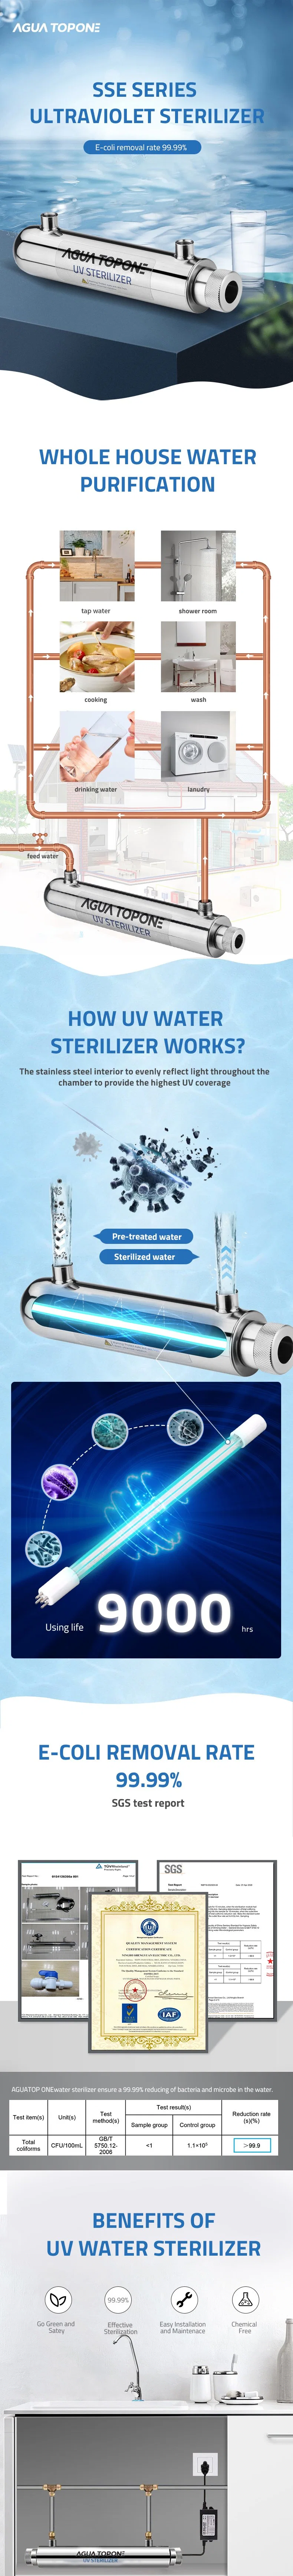 Stainless Steel 11W 1gpm UV Water Purifier Stainless Steel Water Filter Home Use 254nm UVC Lamp Water Sterilizer